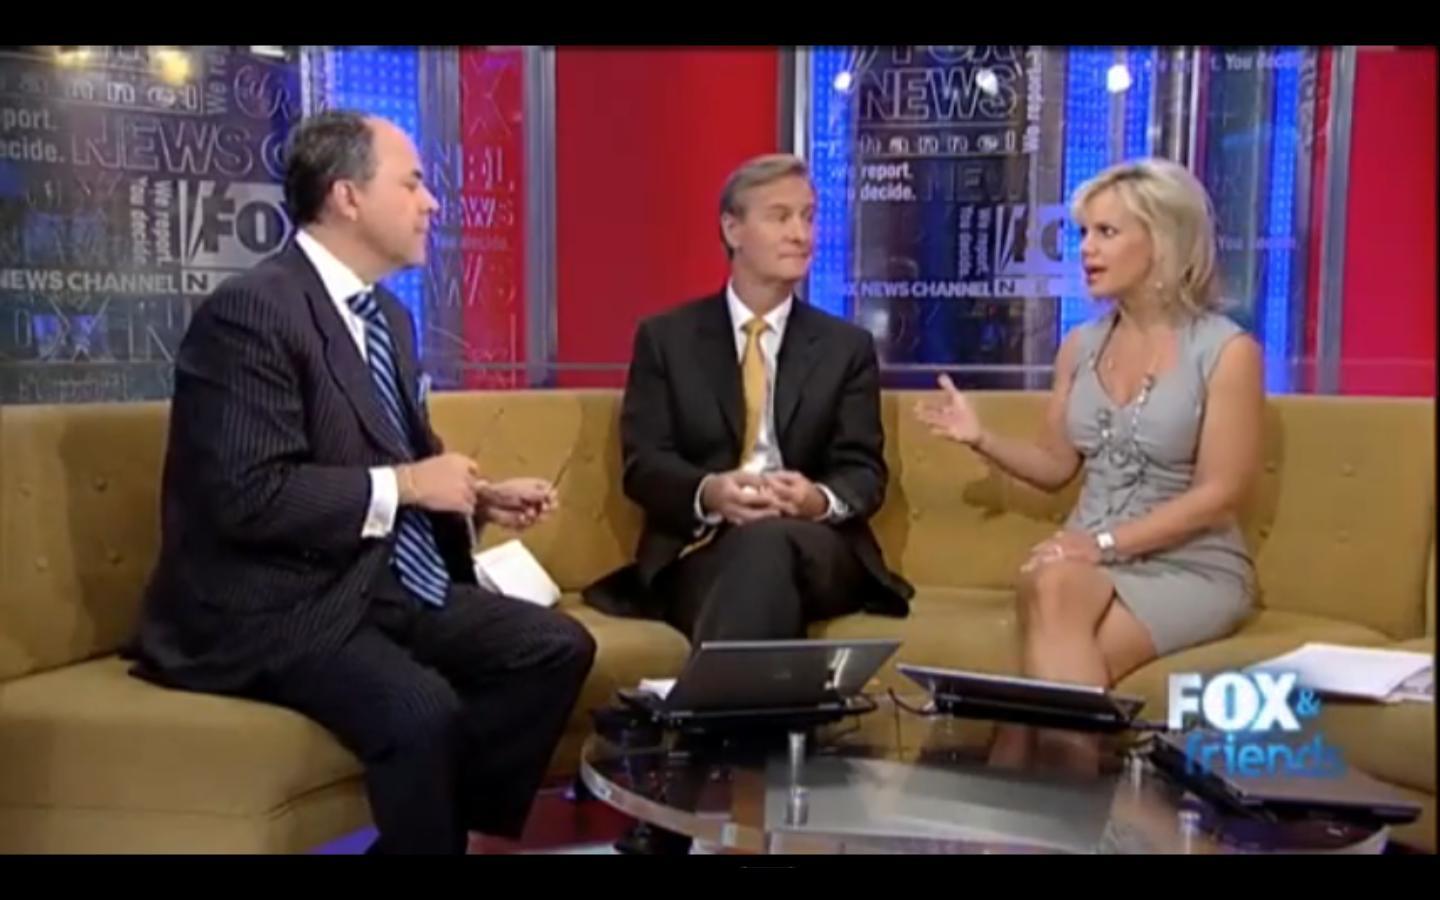 Reporter101 Blogspot: UK Morning Show and Fox News Fox and Friends caps.1440 x 900